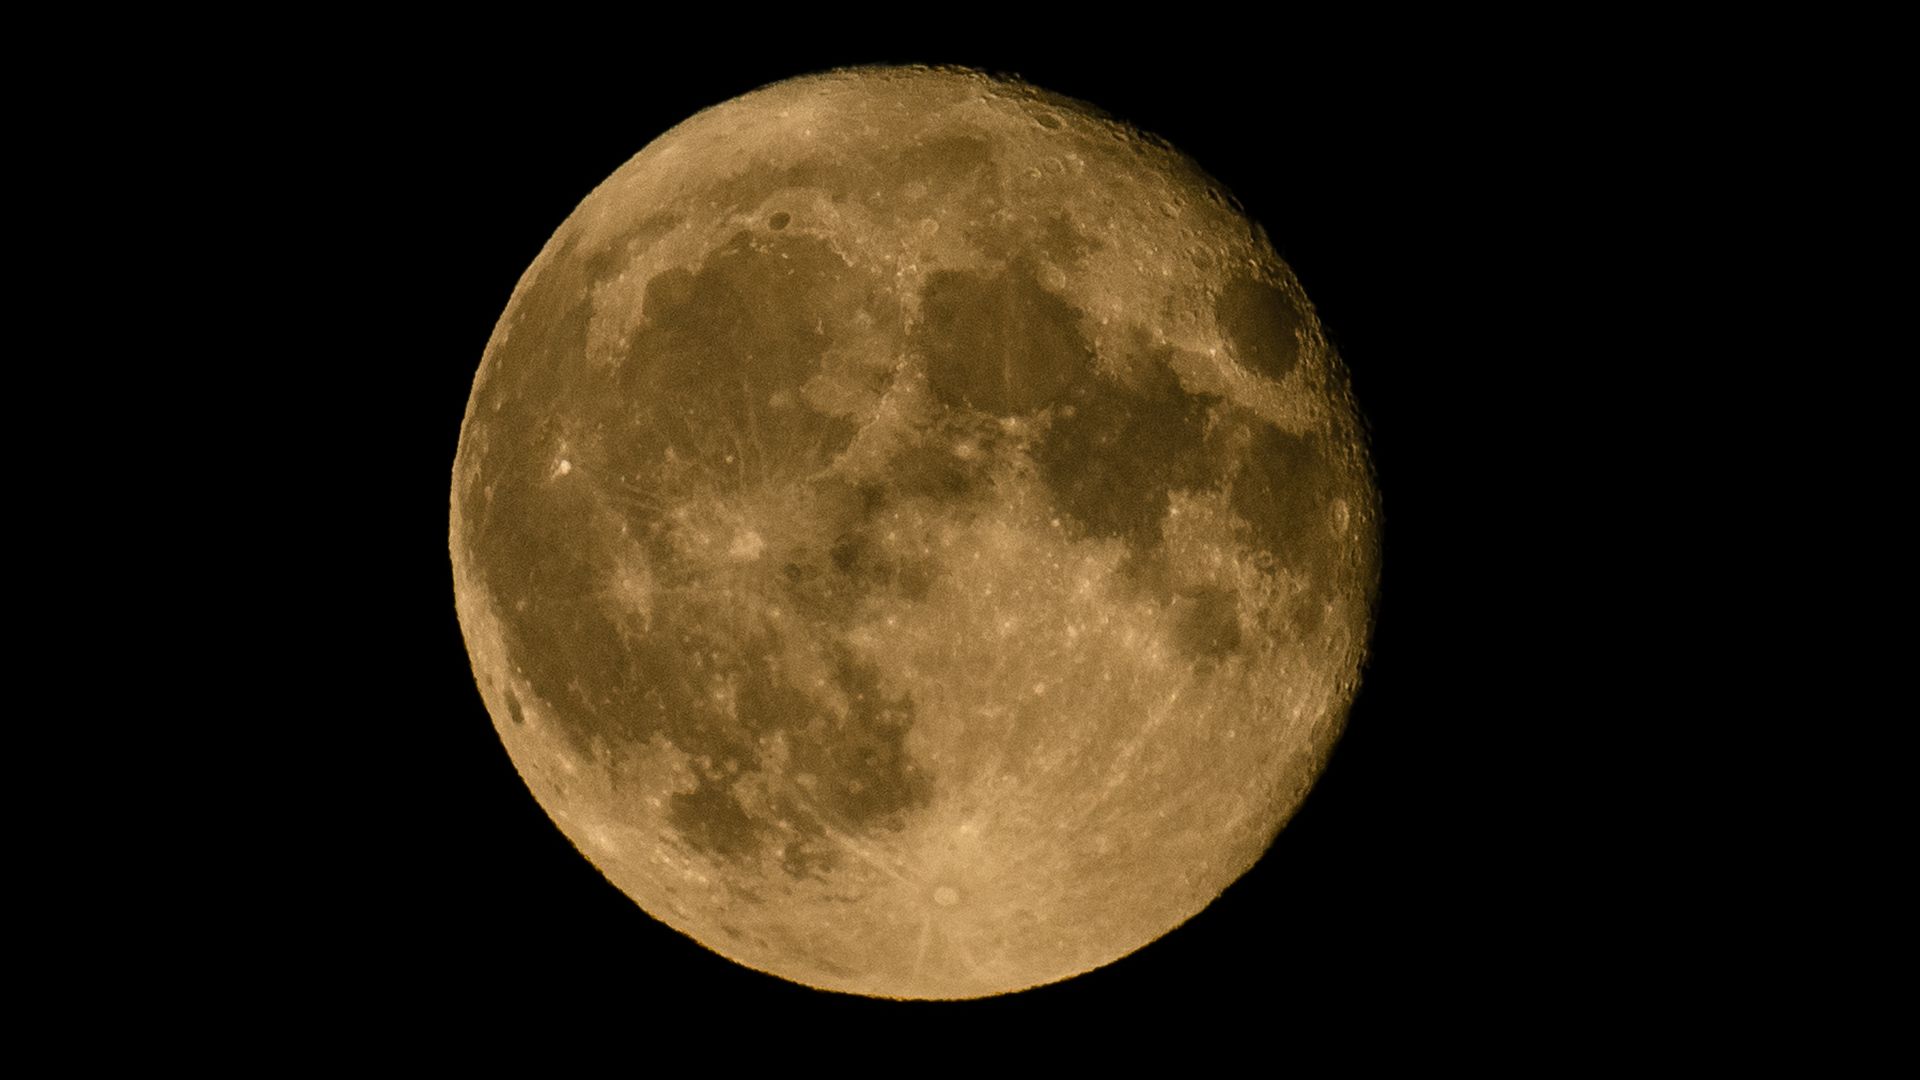 The previous supermoon in August seen in Turin, Italy.